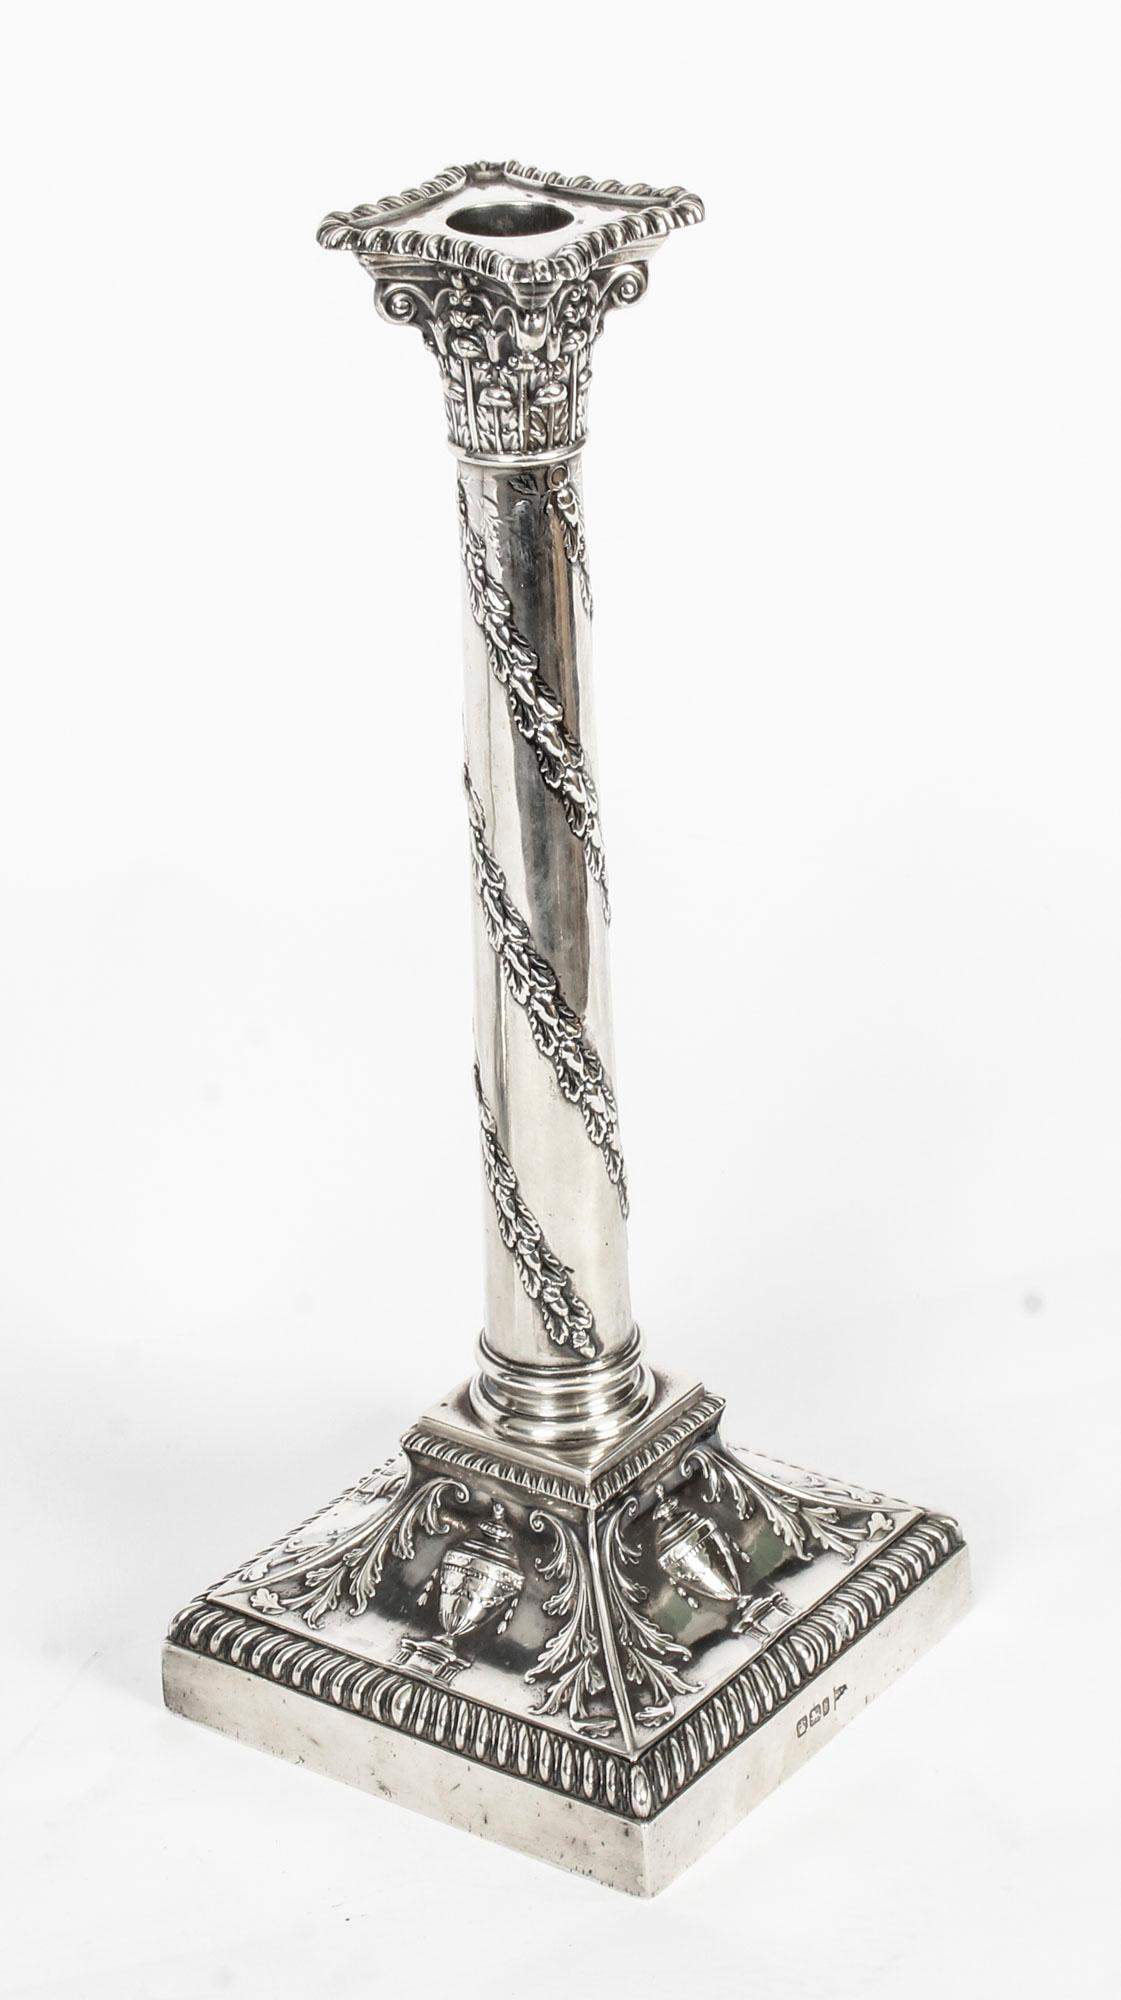 This is an exquisite pair of English antique neoclassical design sterling silver candlesticks bearing hallmarks for Sheffield, dated 1900 and the makers mark of the renowned silversmith Walker and Hall.
 
The candlesticks feature exquisite reeded